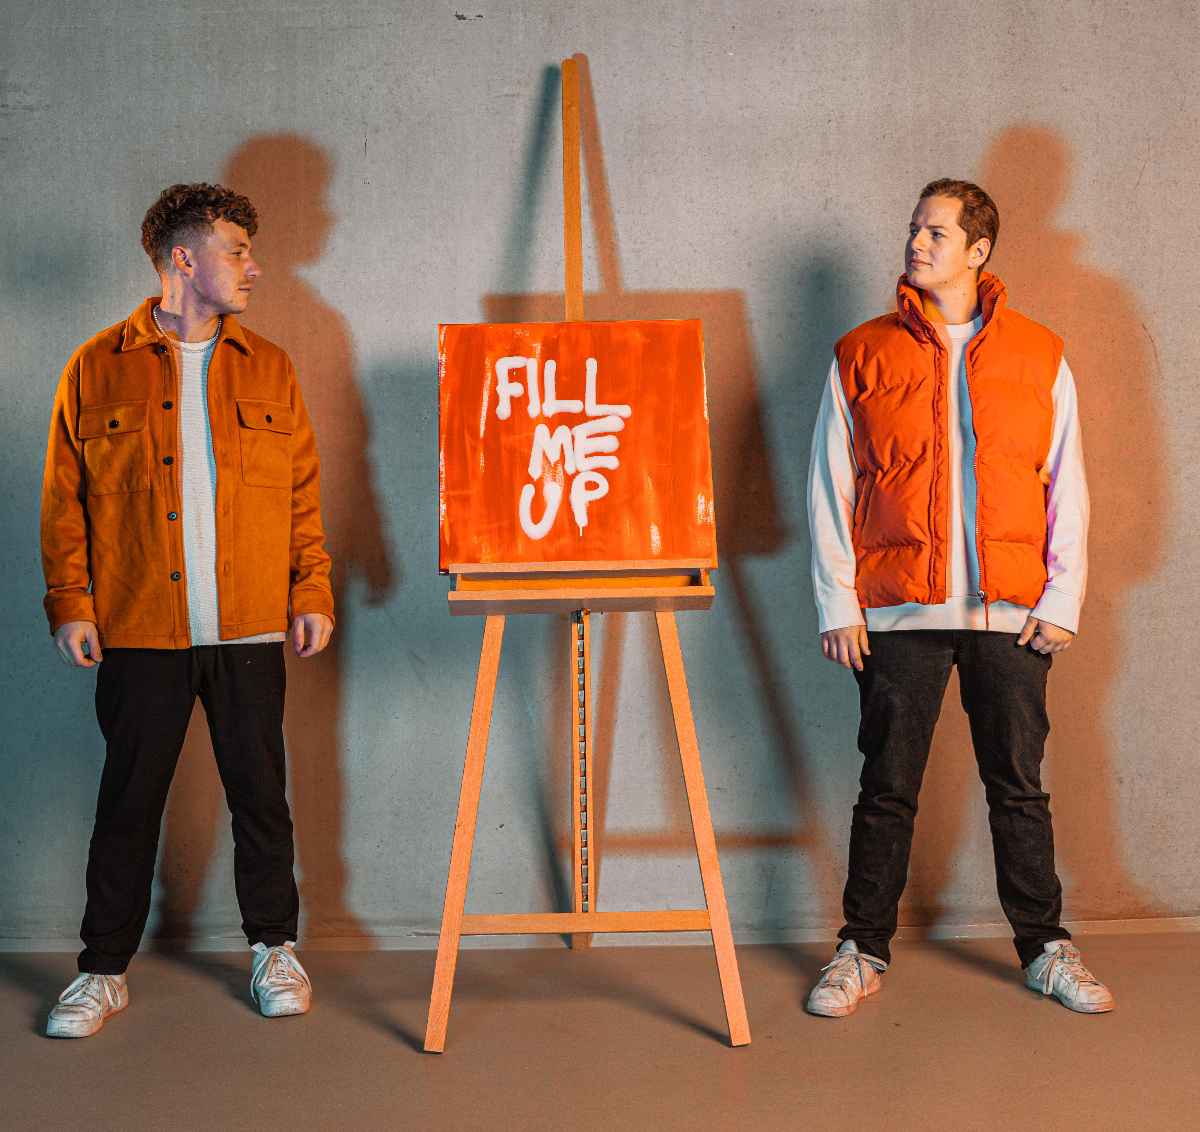 Coverrun unveil uplifting new single ‘Fill Me Up’ feat. J Fitz: Listen